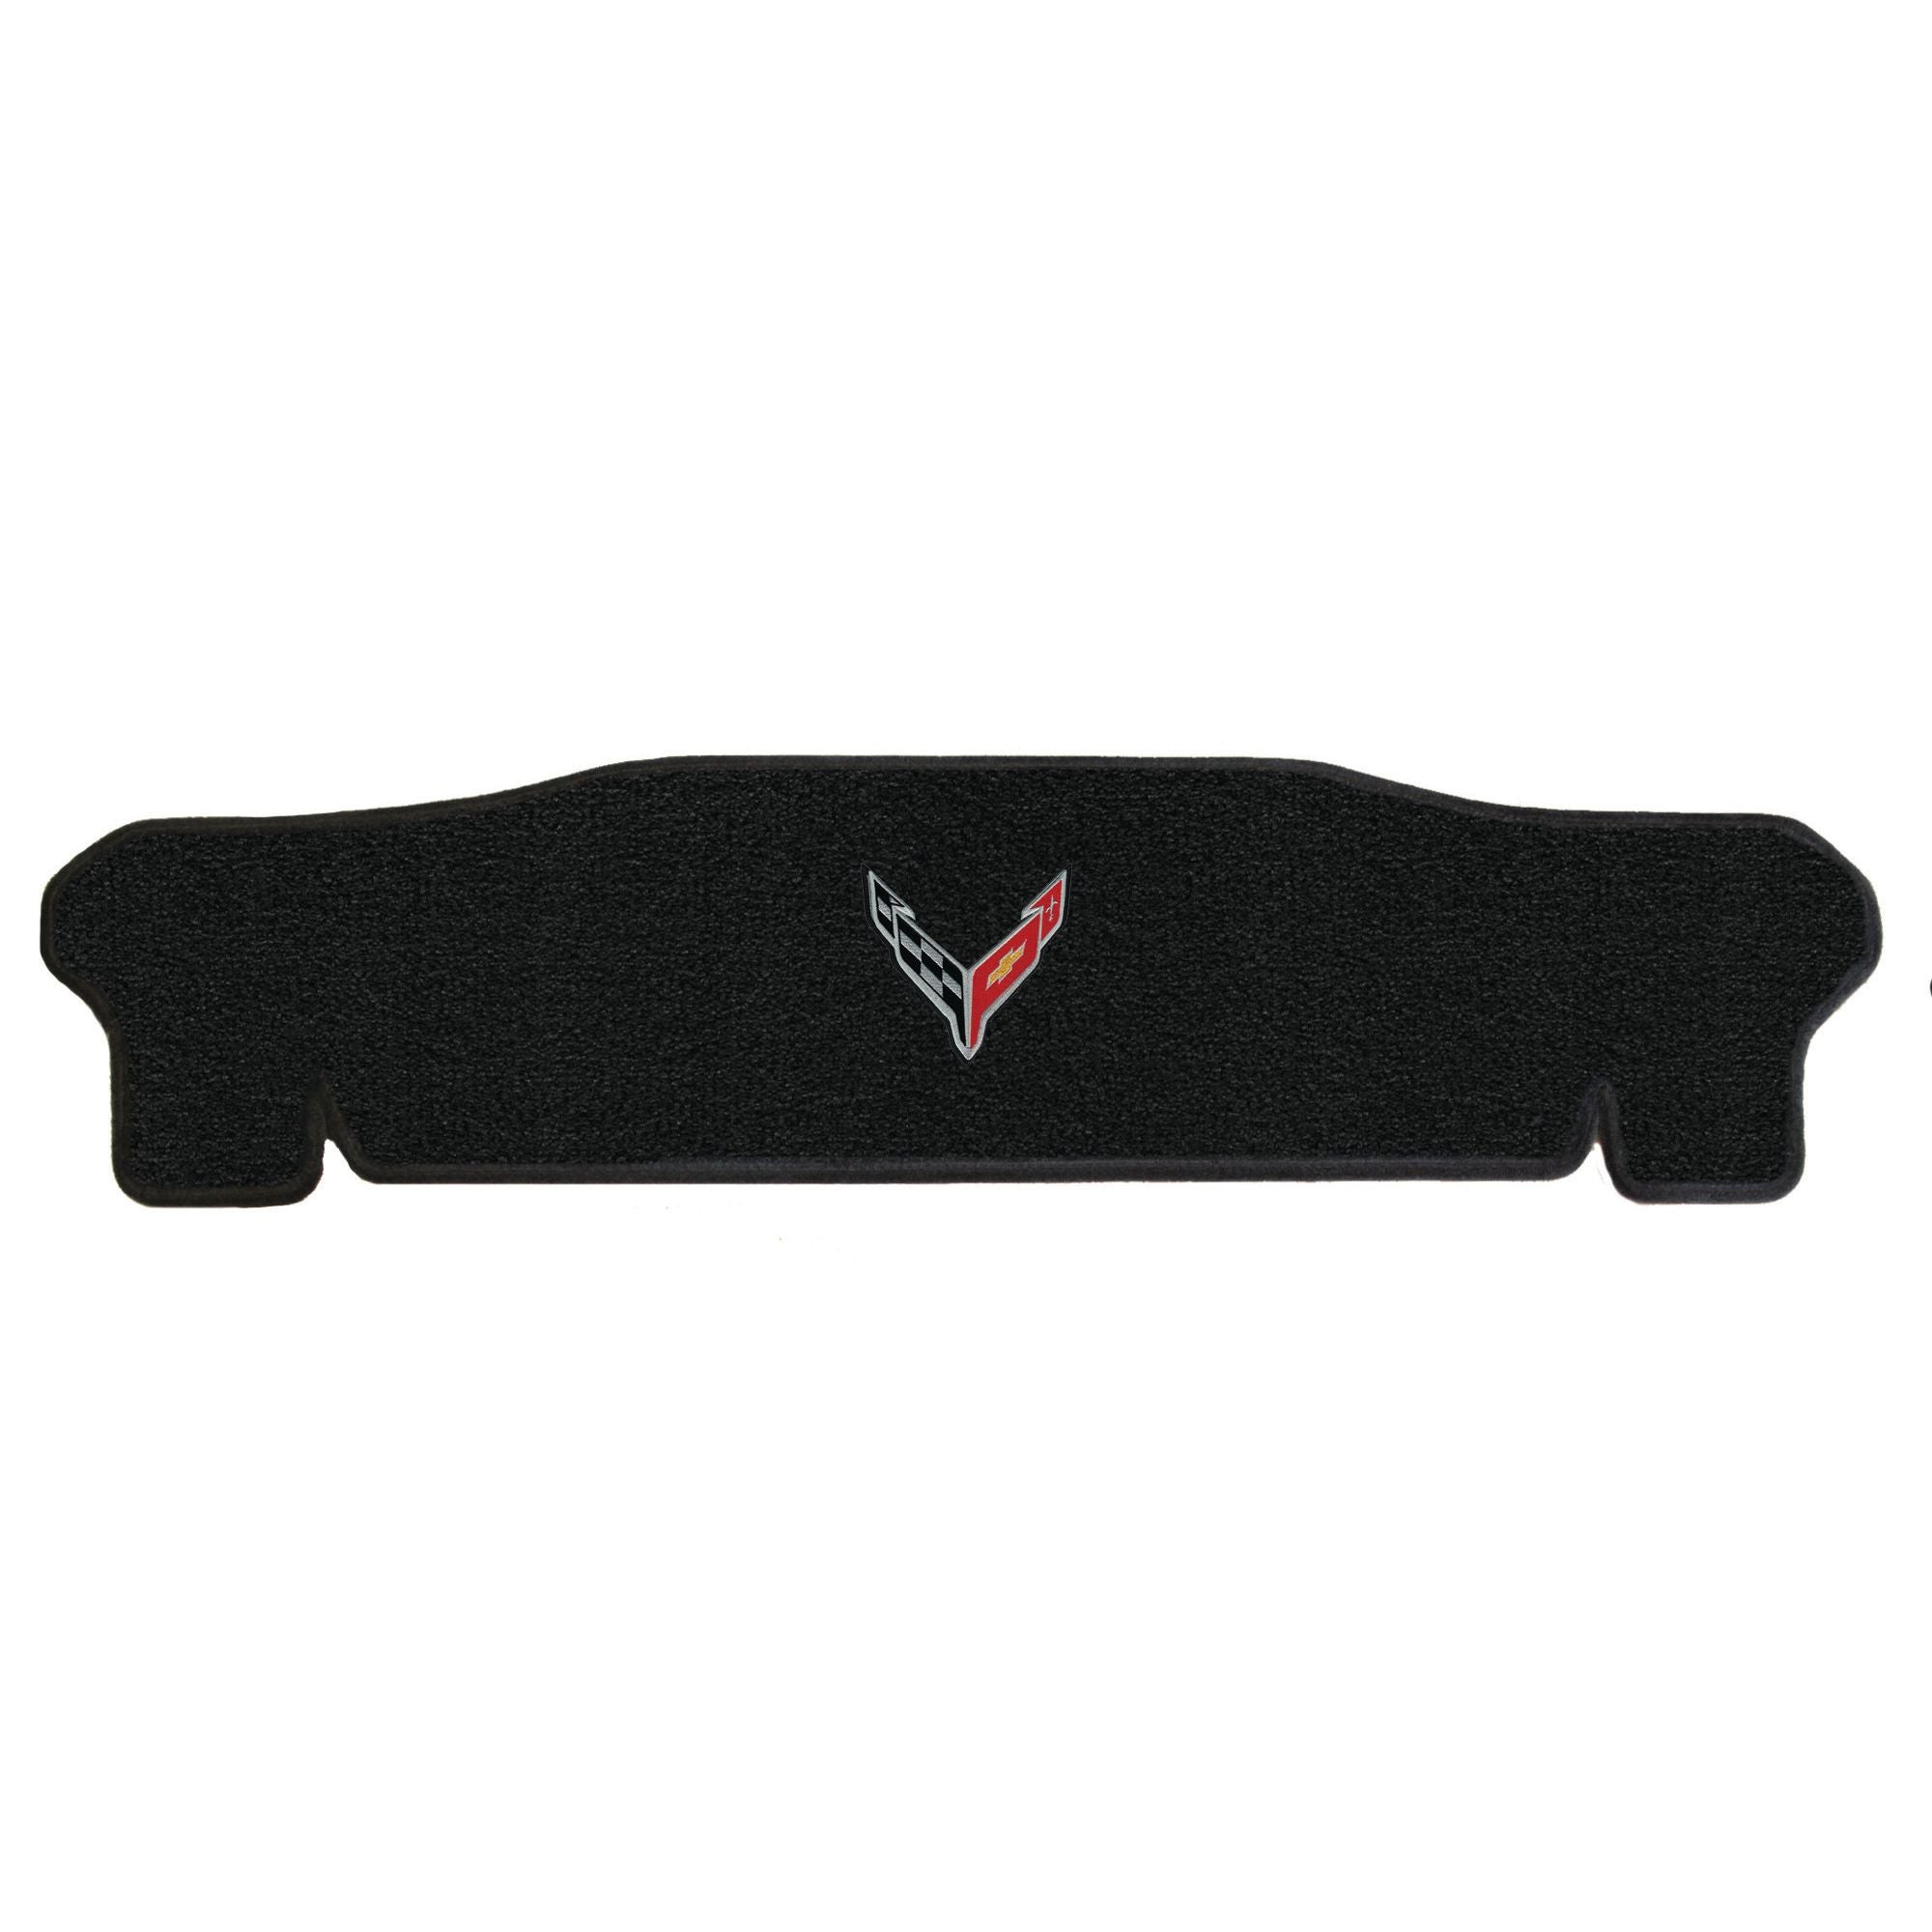 C8 Corvette Rear Cargo Mats - Lloyds Mats with C8 Crossed Flags : Coupe